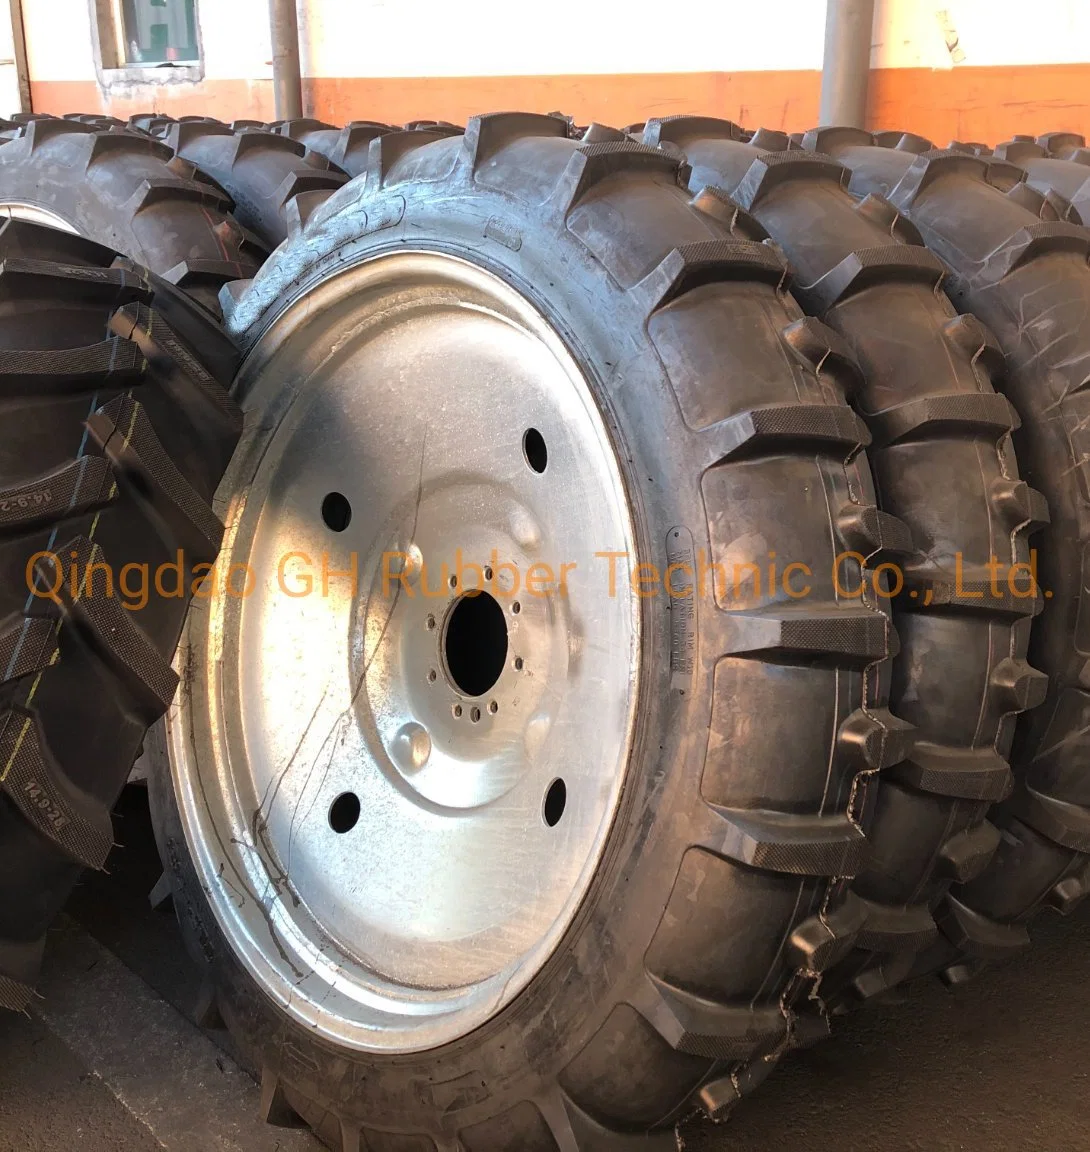 Irrigation Tire/Tyre Farm Tire/ Agricultural Tire (11.2-38) Galvanized Rim Wheel (W10X38) Assembly